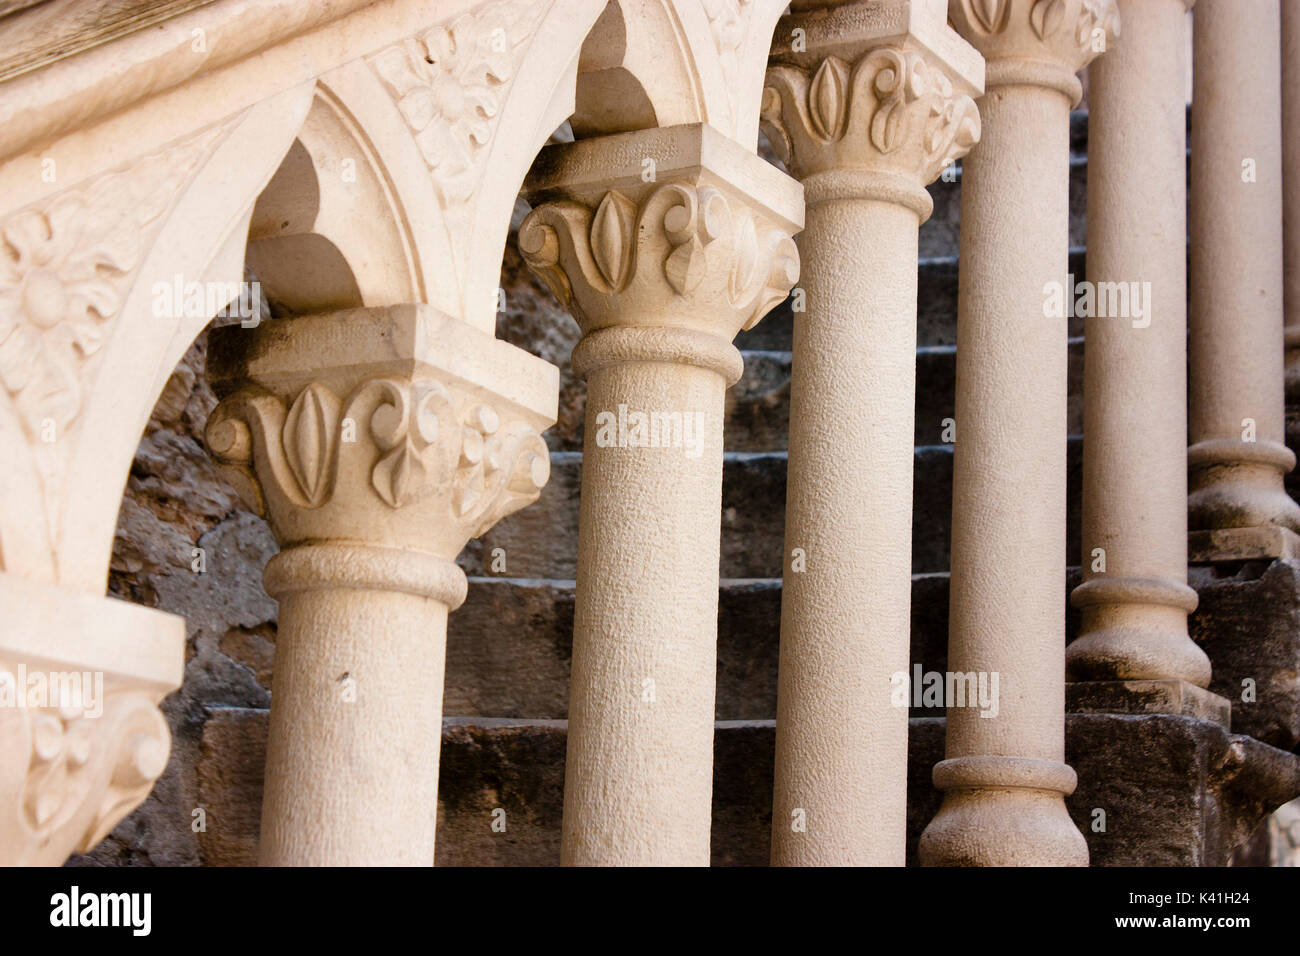 Architectural detail of a stone building in old Mediterranean town Sibenik, Croatia: Carved balusters columns on stairway Stock Photo